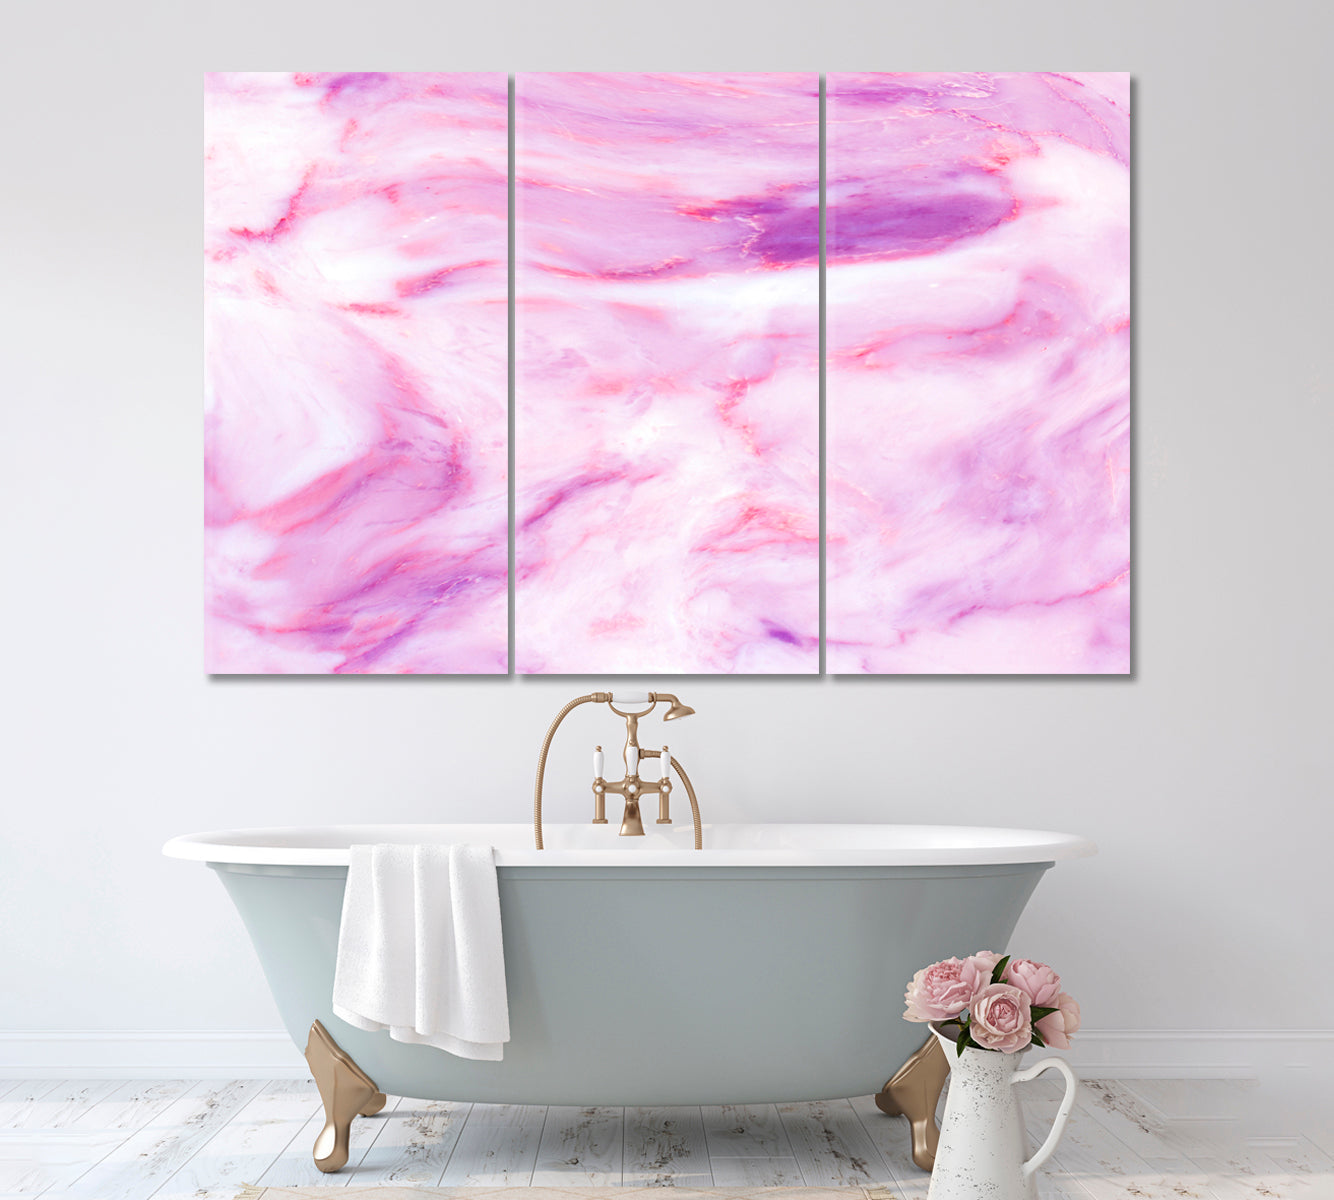 Abstract Pink Marble with Veins Canvas Print ArtLexy 3 Panels 36"x24" inches 